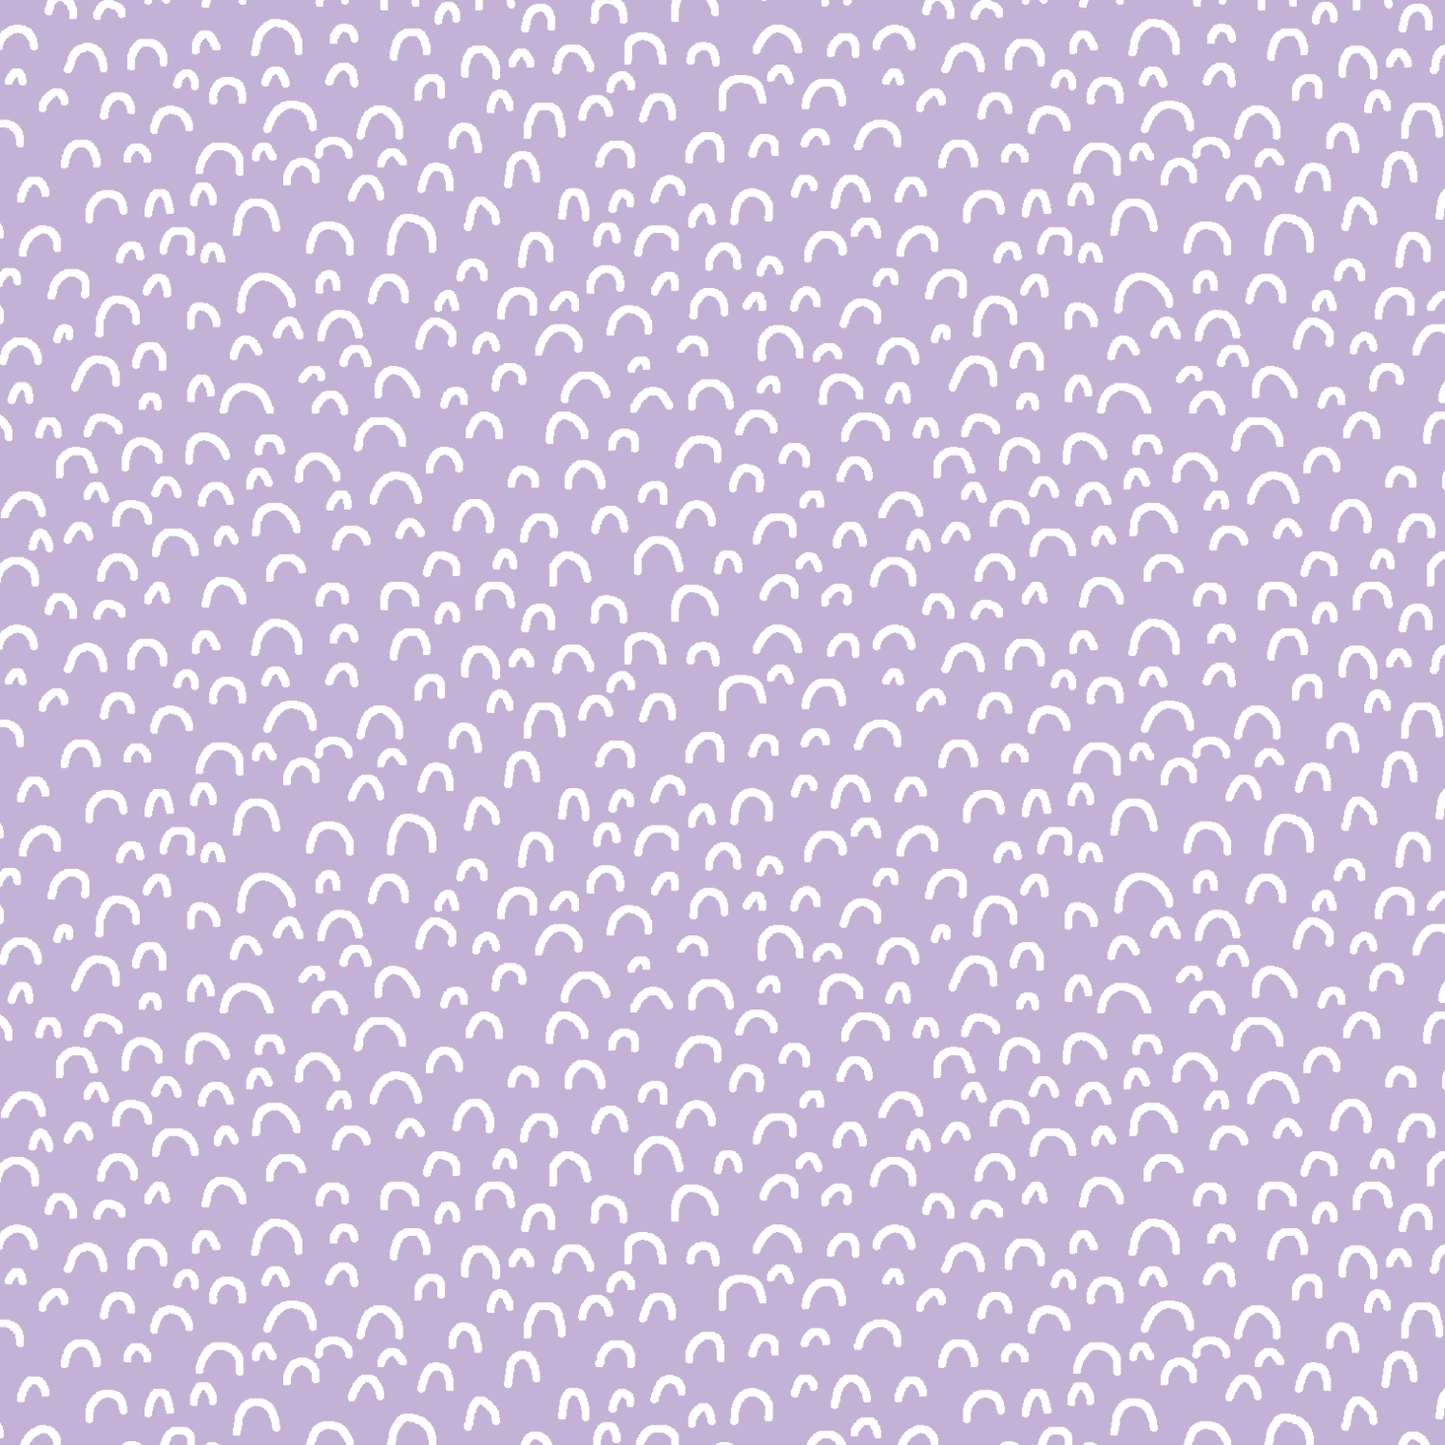 Doodle in Lilac